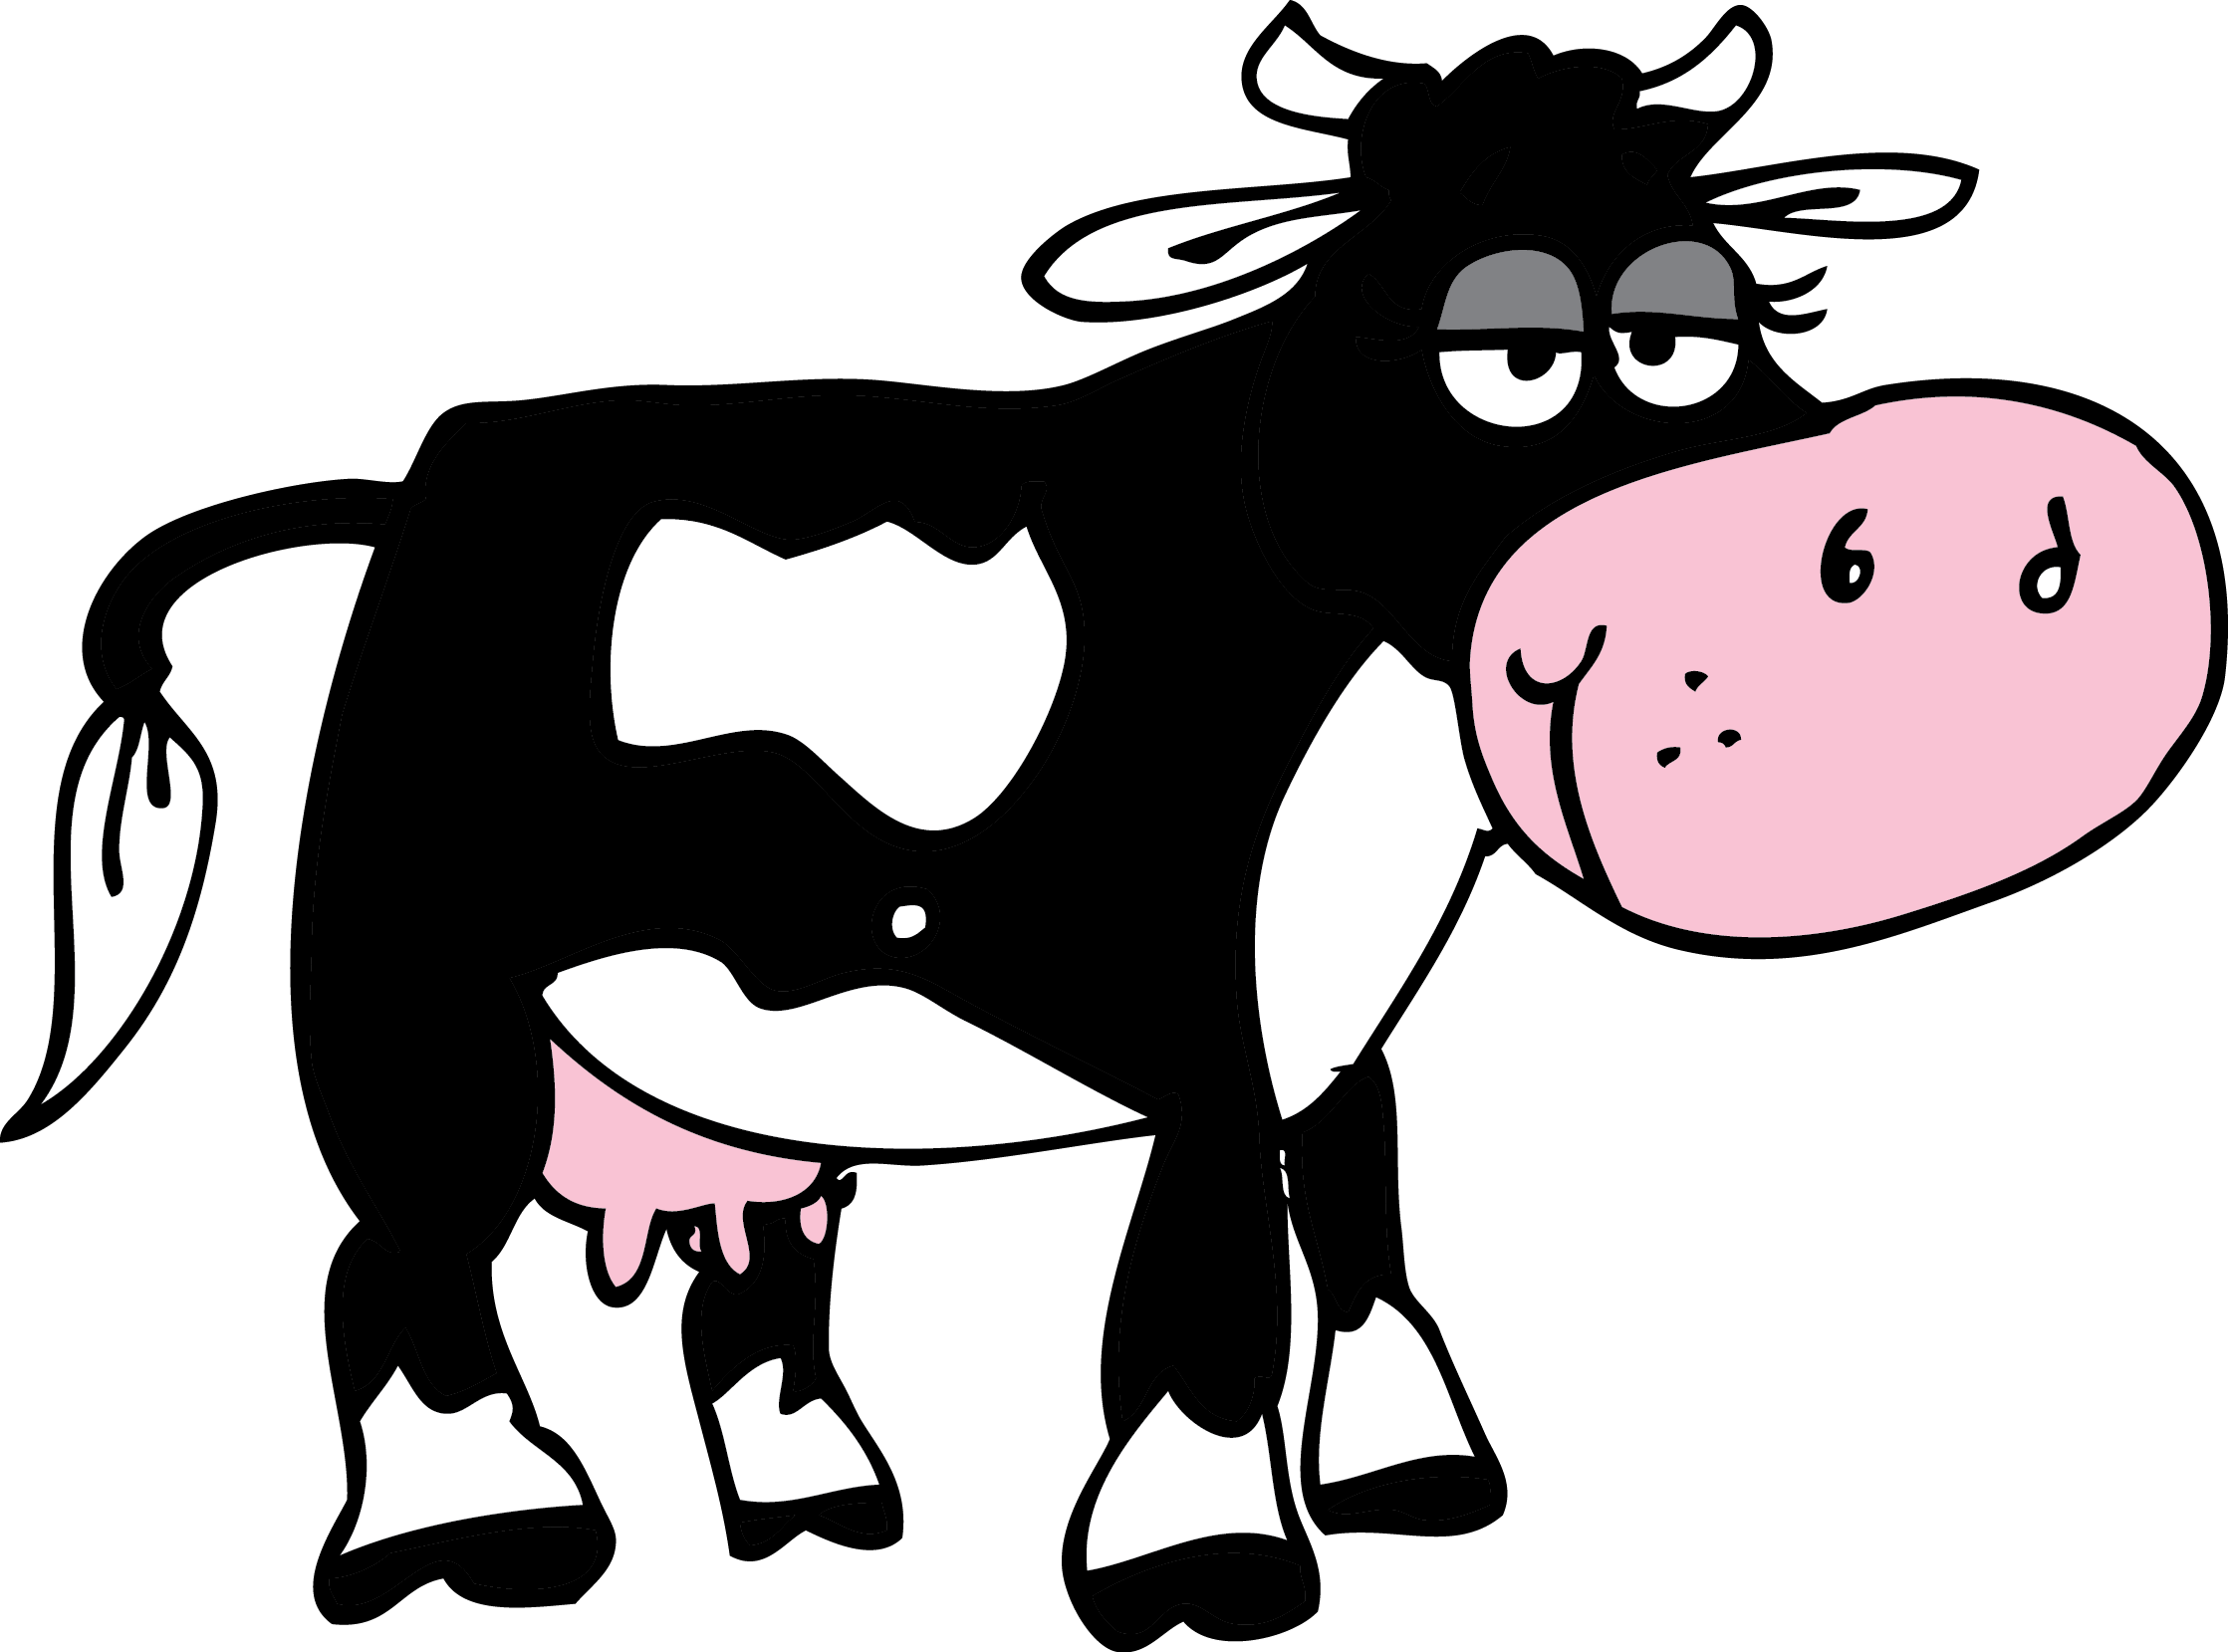 Wagon clipart cow. Cartoon jumping images pictures